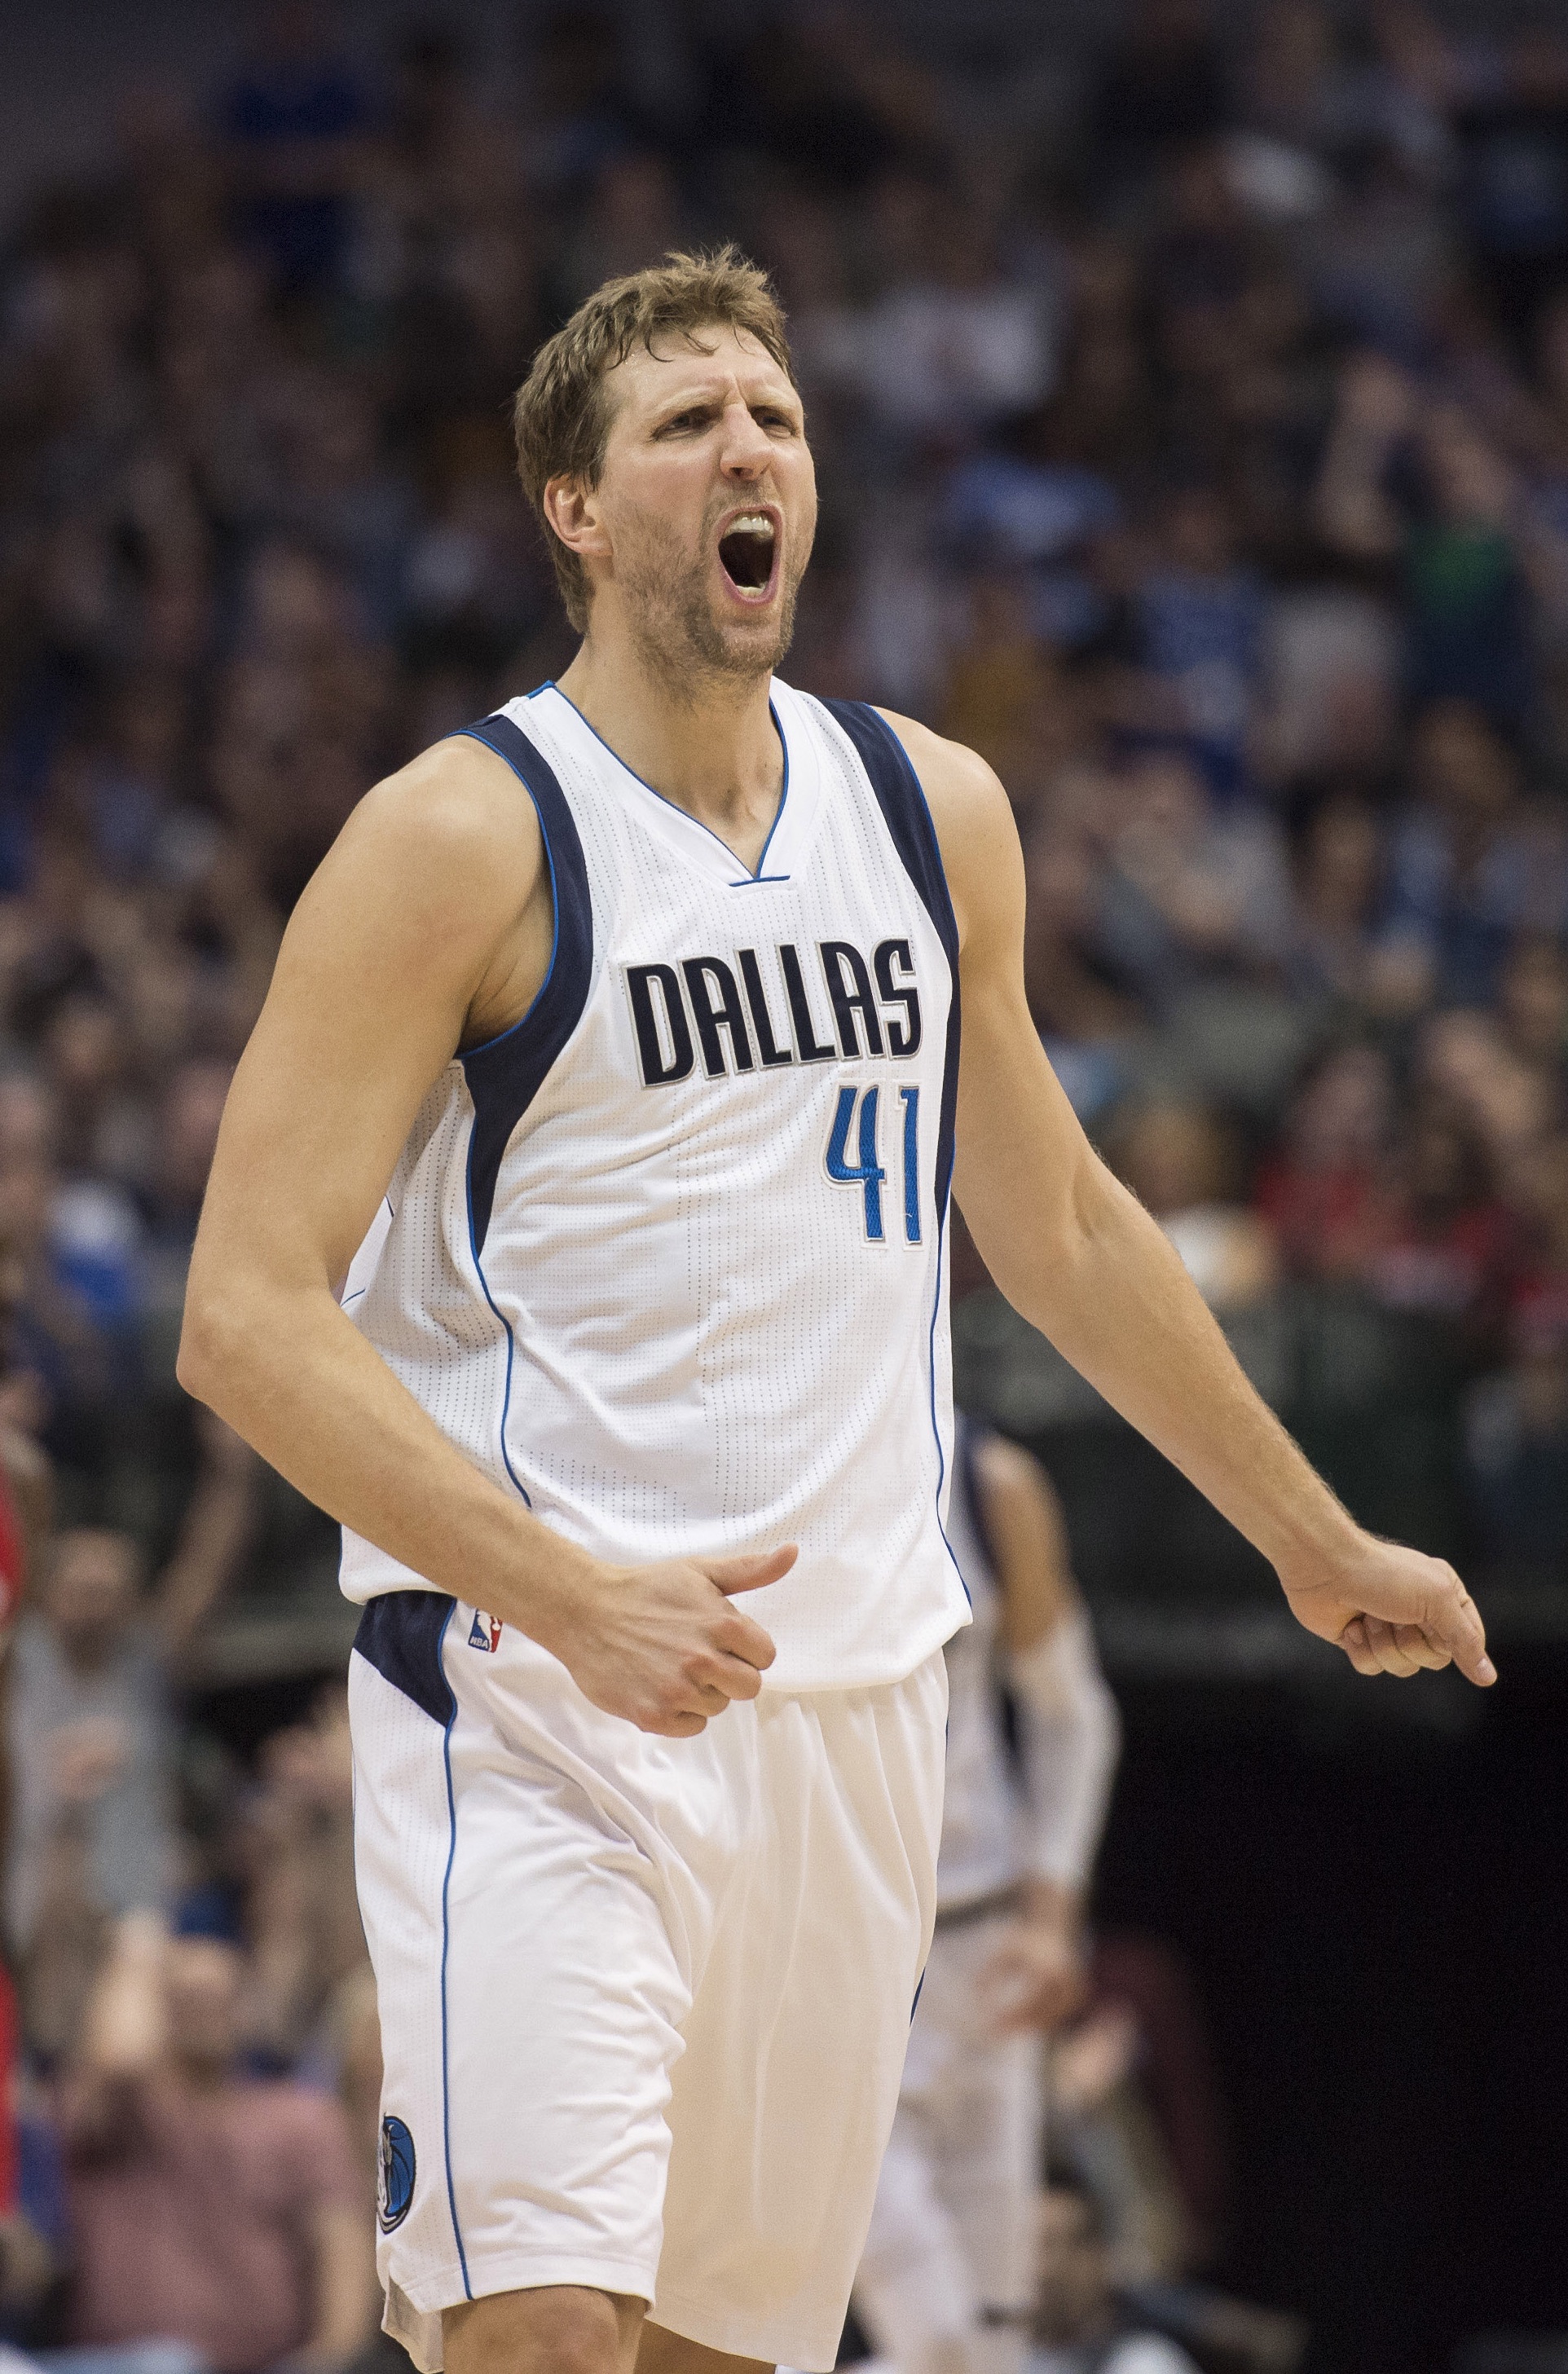 Who is the best German on the Mavericks roster right now?